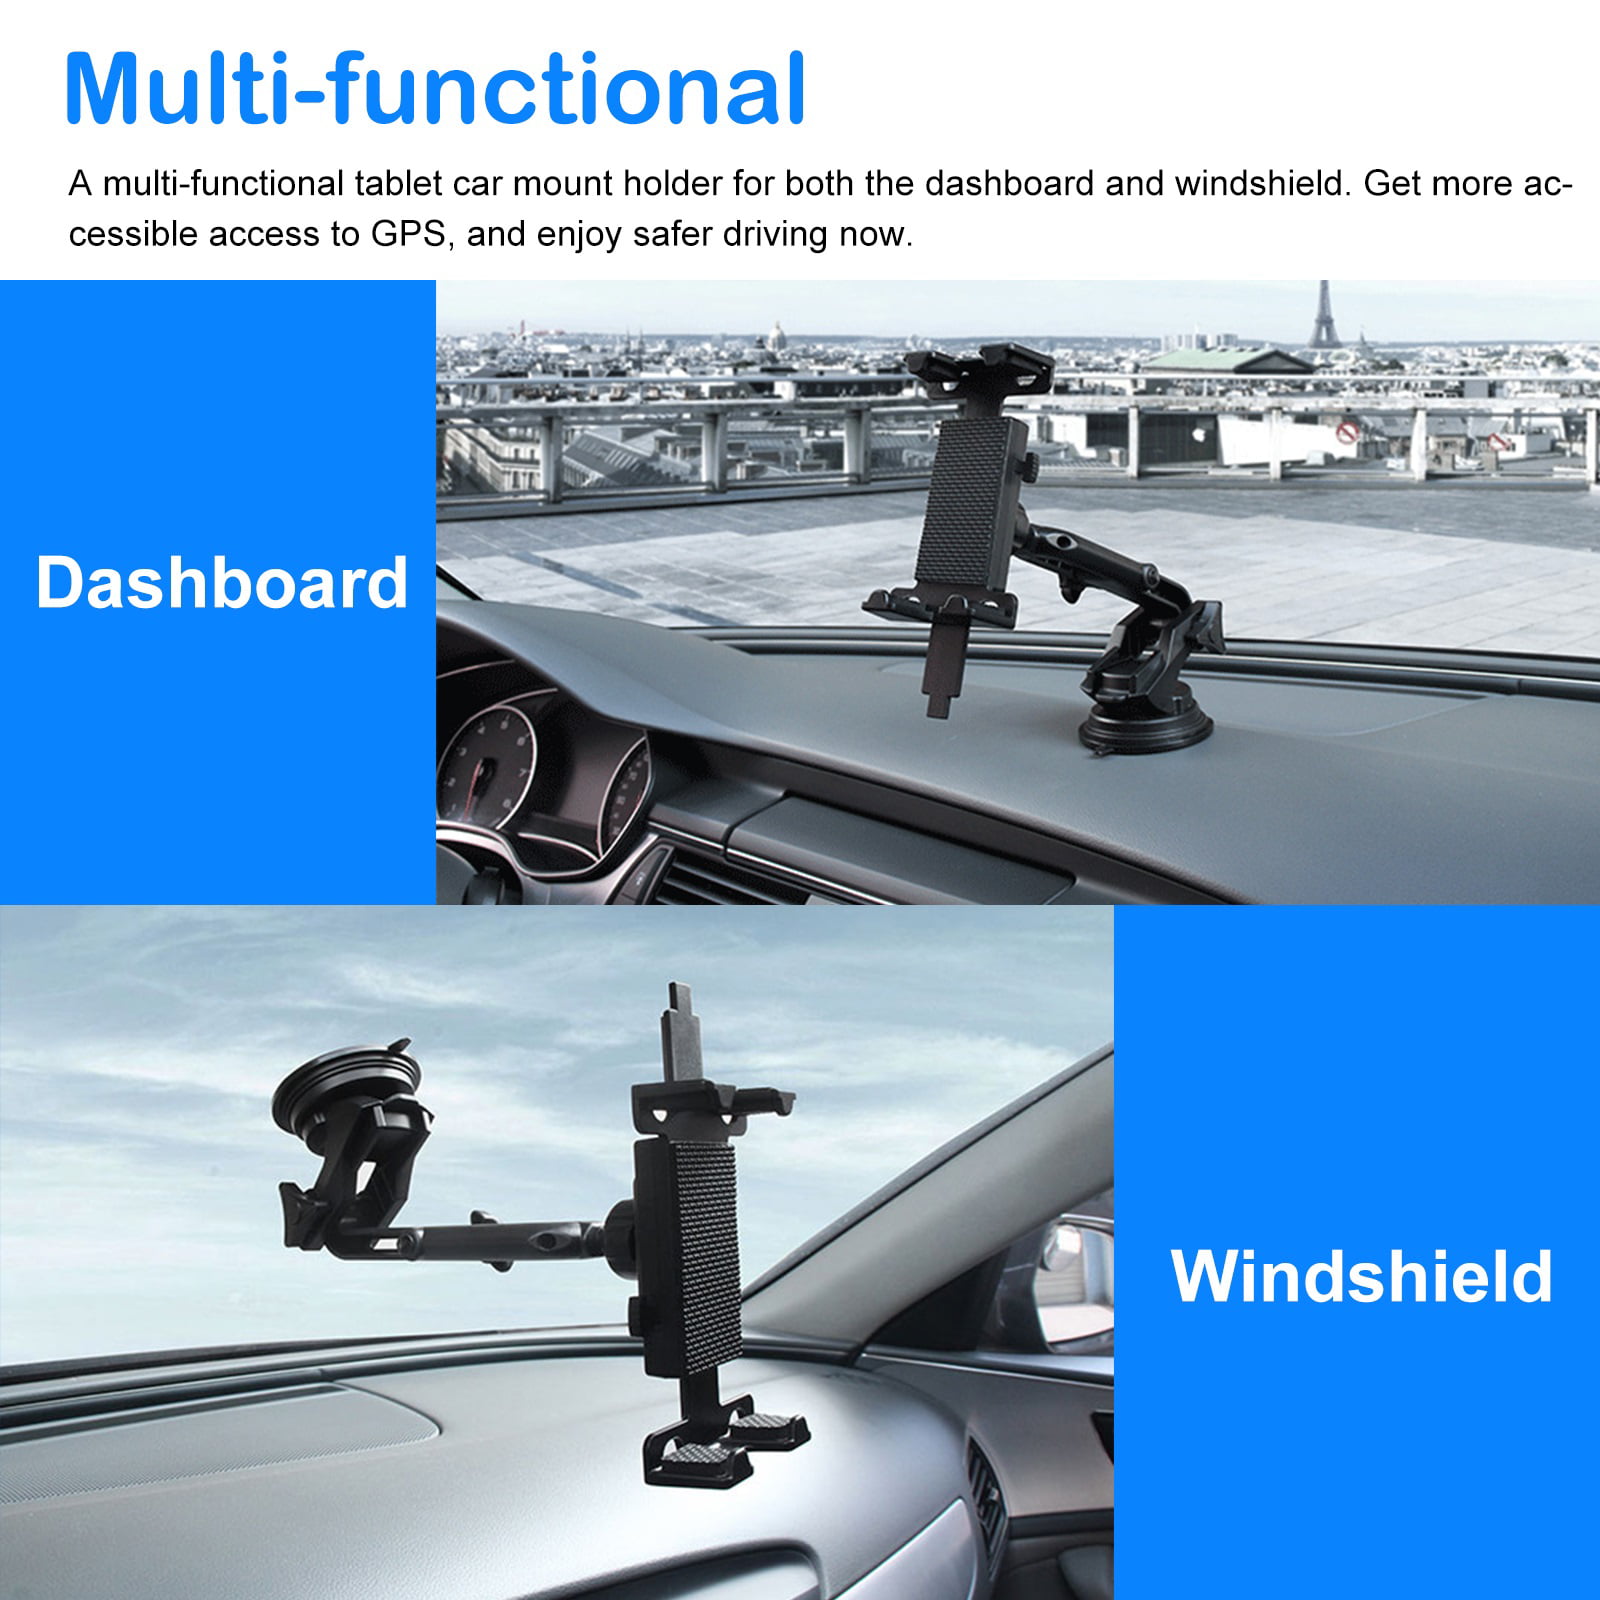 Car Tablet Mount, TSV Tablet Holder for Windshield Dashboard, 360 Rotating  Universal Suction Cup Bracket Fit for iPhone, iPad Mini Air, Samsung Galaxy  Tab 